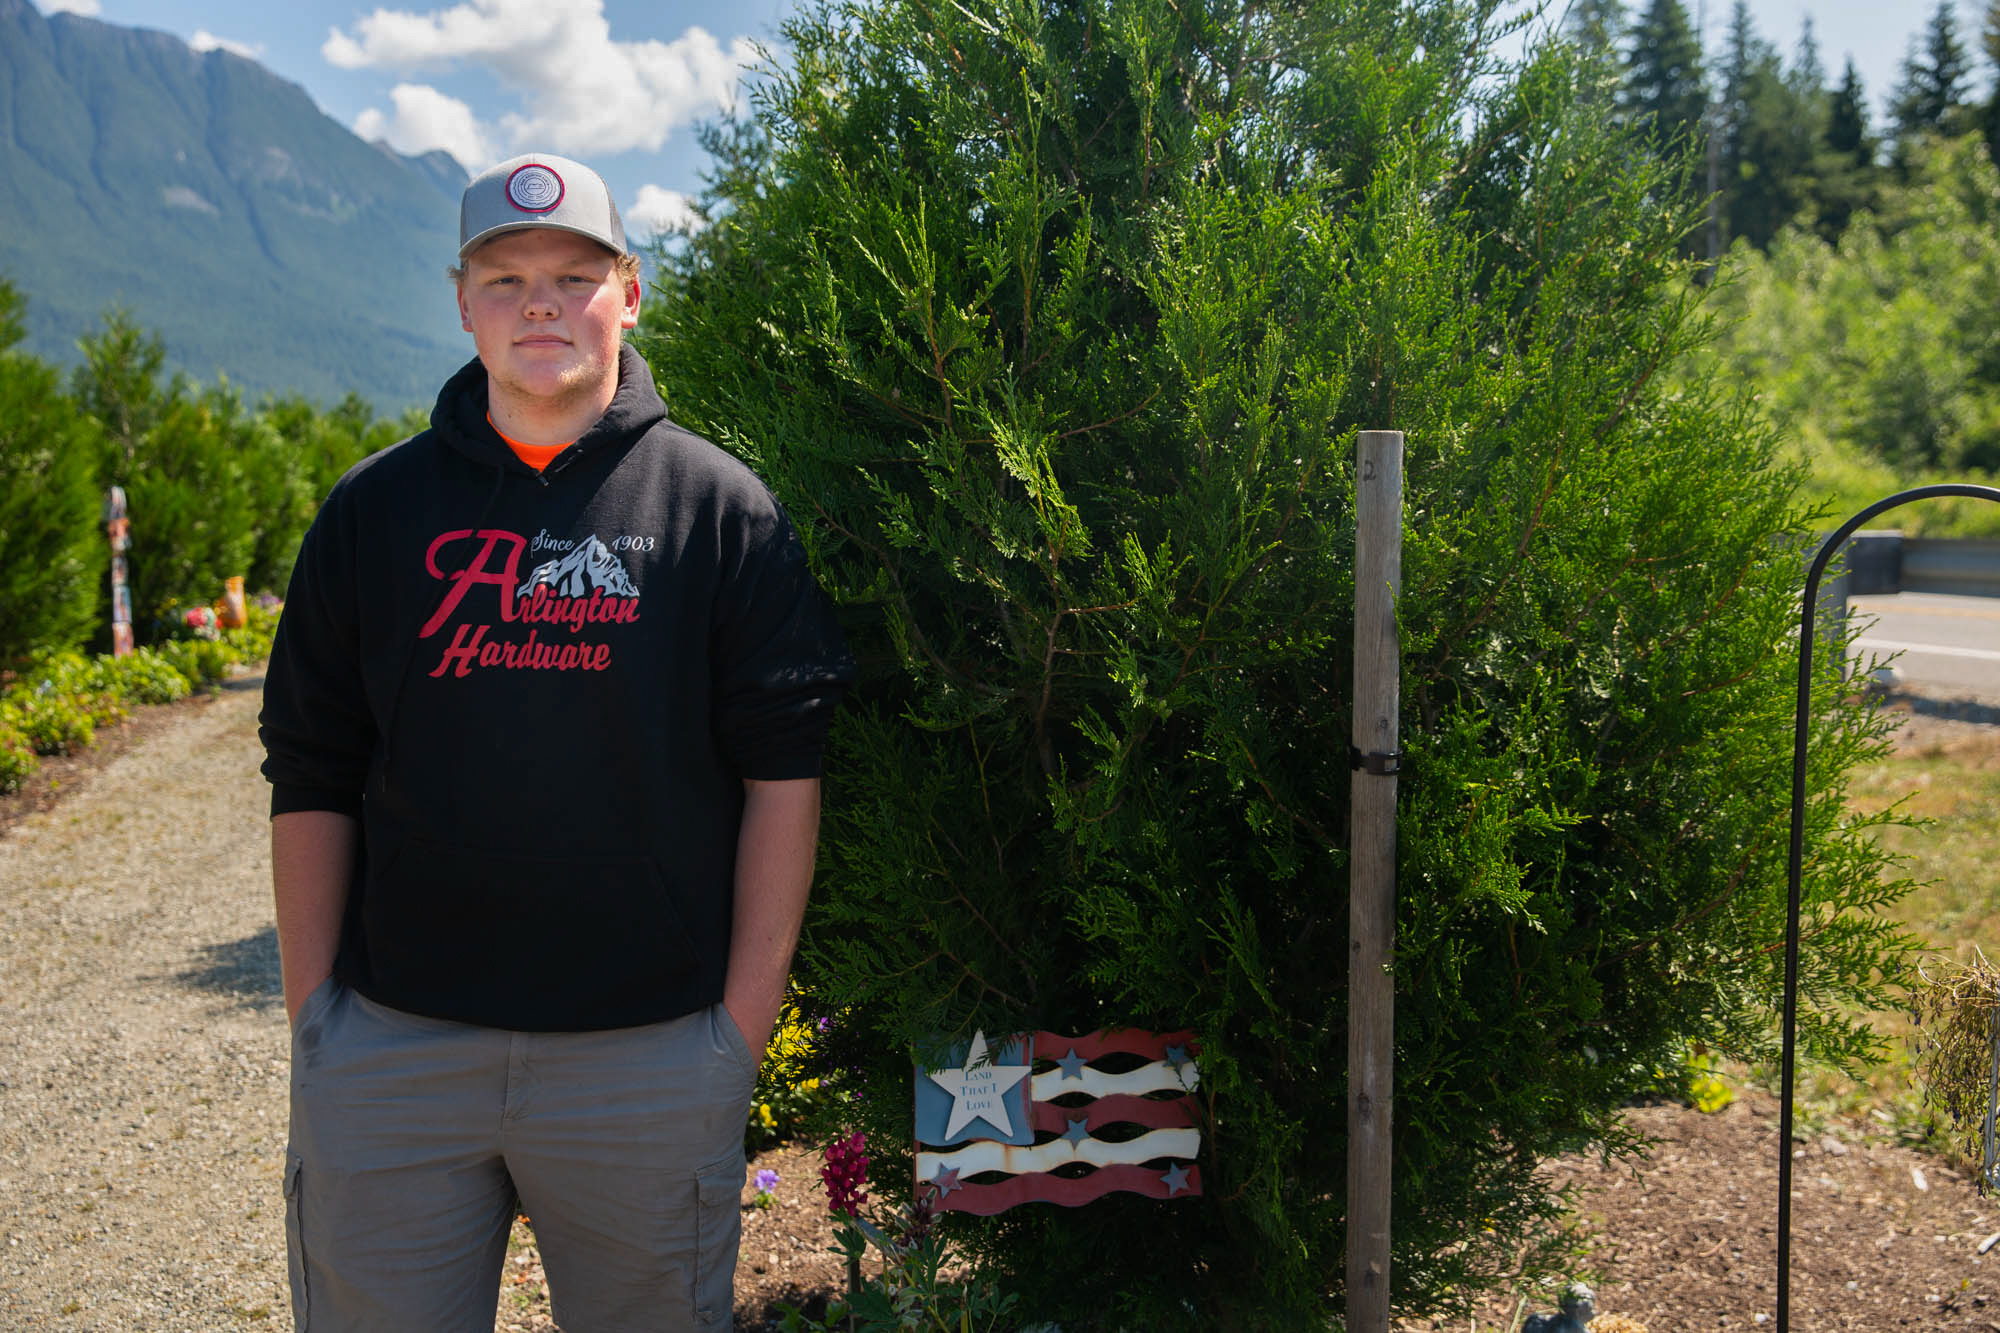 Quinton Kuntz - Quinton Kuntz stands by a tree planted in memory of his great-aunt, one of 43 residents of Oso, Washington, who died in a landslide. Kuntz was in high school at the time and missed the slide by a few hours because his baseball team had a game. (Allie Barton/News21)